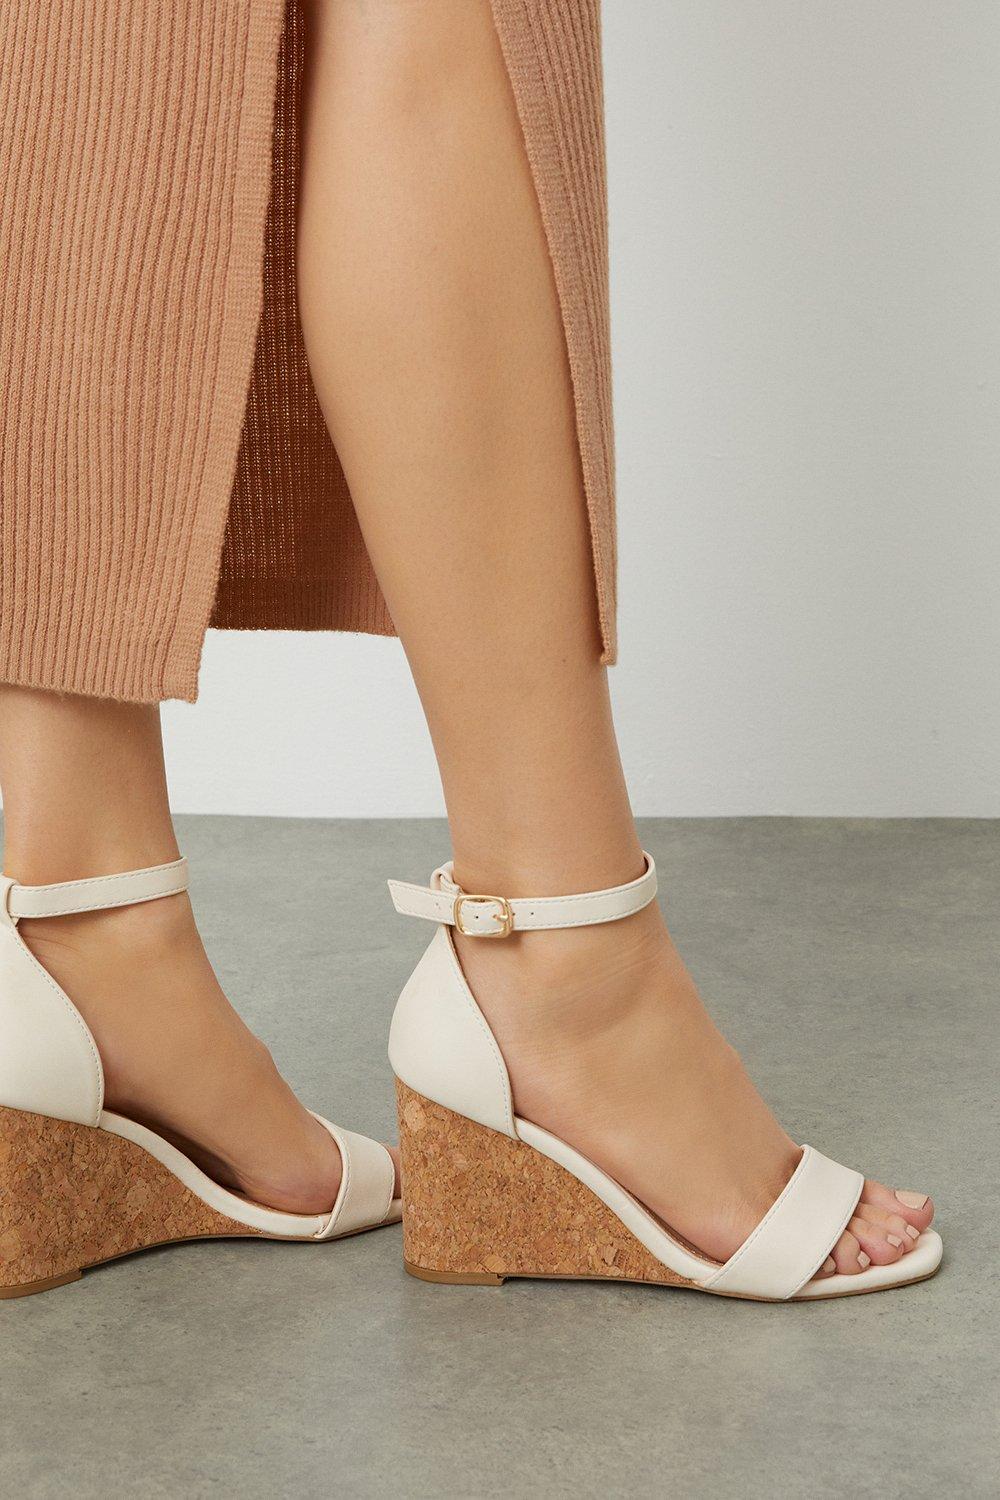 Women’s Wide Fit Rocco Barely There Wedges - cream - 5